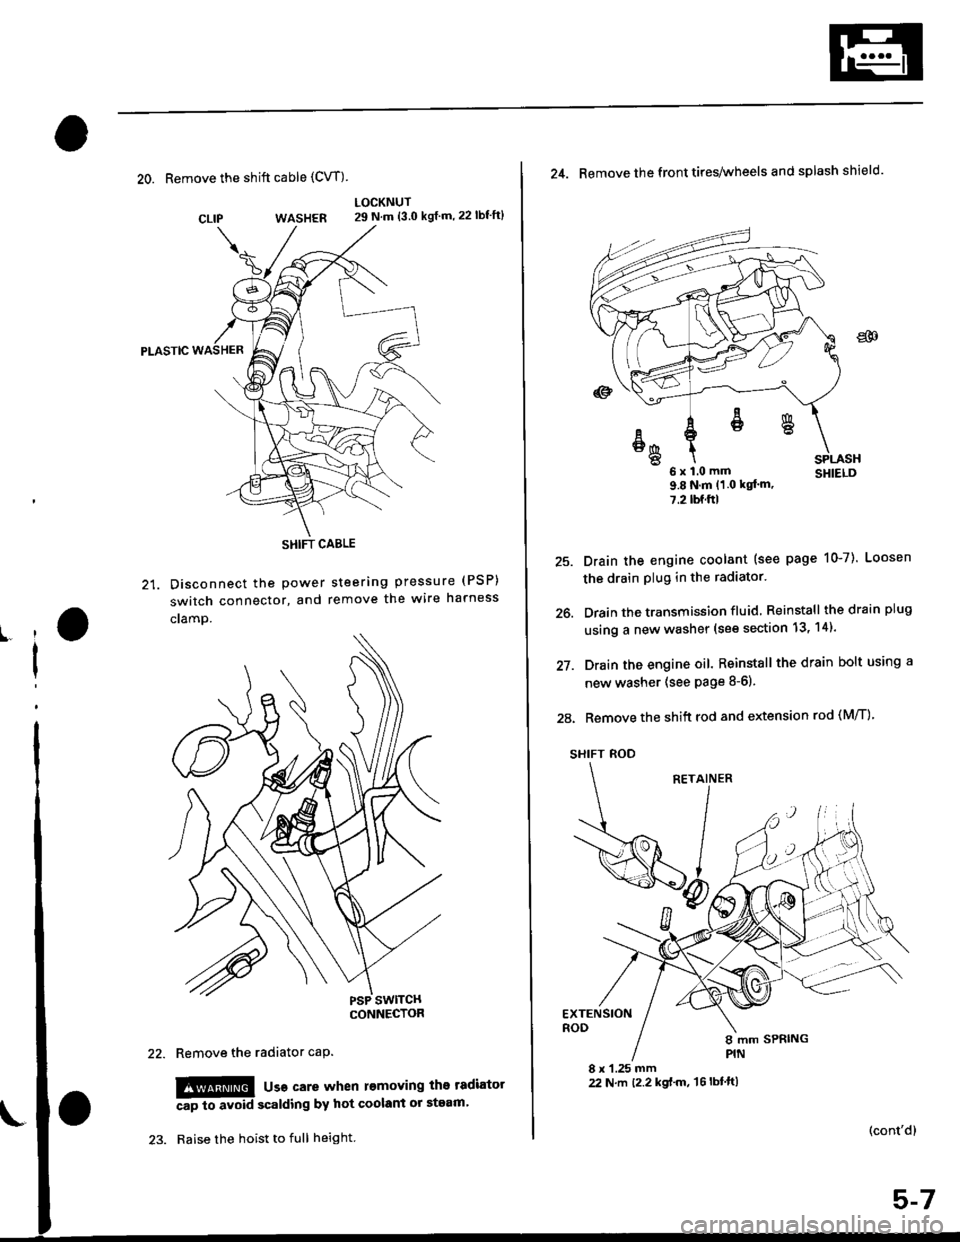 HONDA CIVIC 2000 6.G Service Manual 20. Remove the shift cable (CVT)
WASHER
Pt-Aslc
21. Disconnect the Power
switch connector, and
cramp.
LOCKNUT29 N.m {3.0 kgf m,22lbfft}
steering pressure (PSP)
remove the wire harness
CLIP
ll
I
Remov